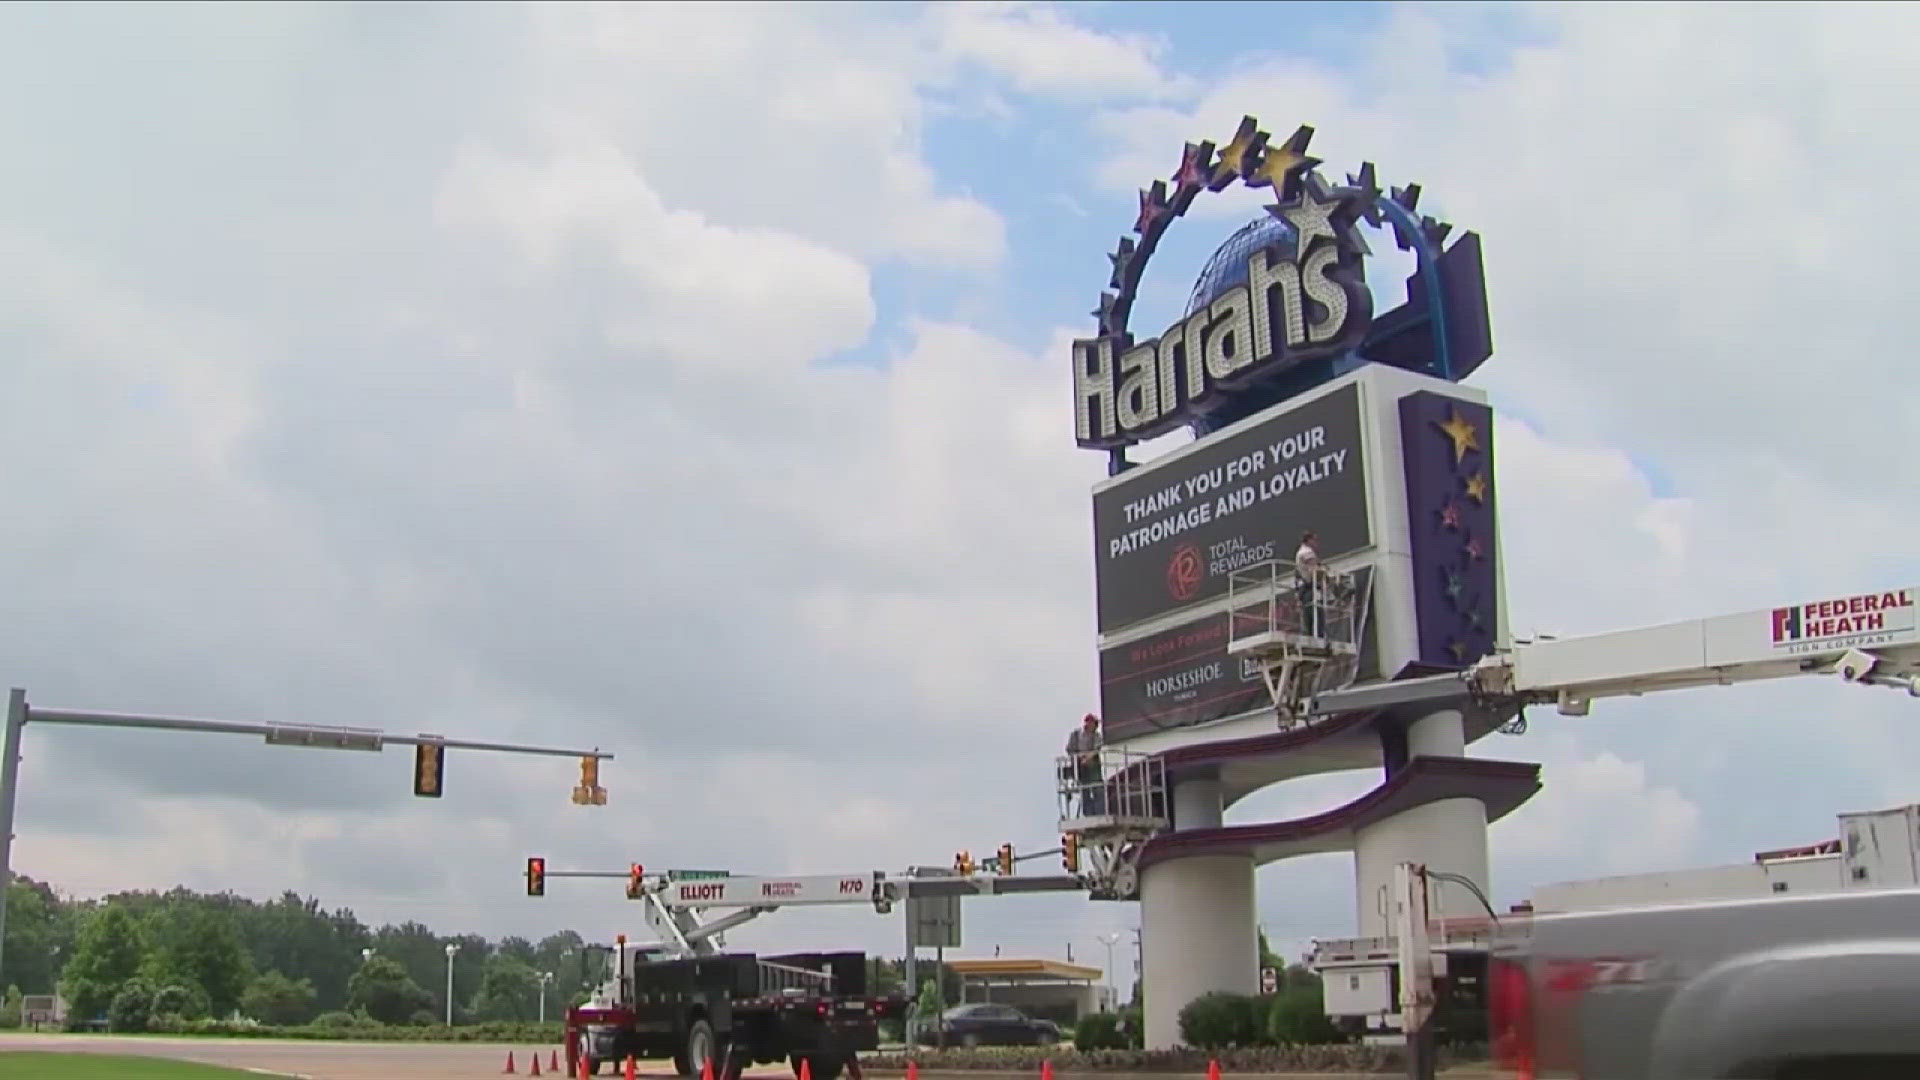 Proposal to House Migrant Children at Former Casino Hotels Sparks Controversy in Mississippi